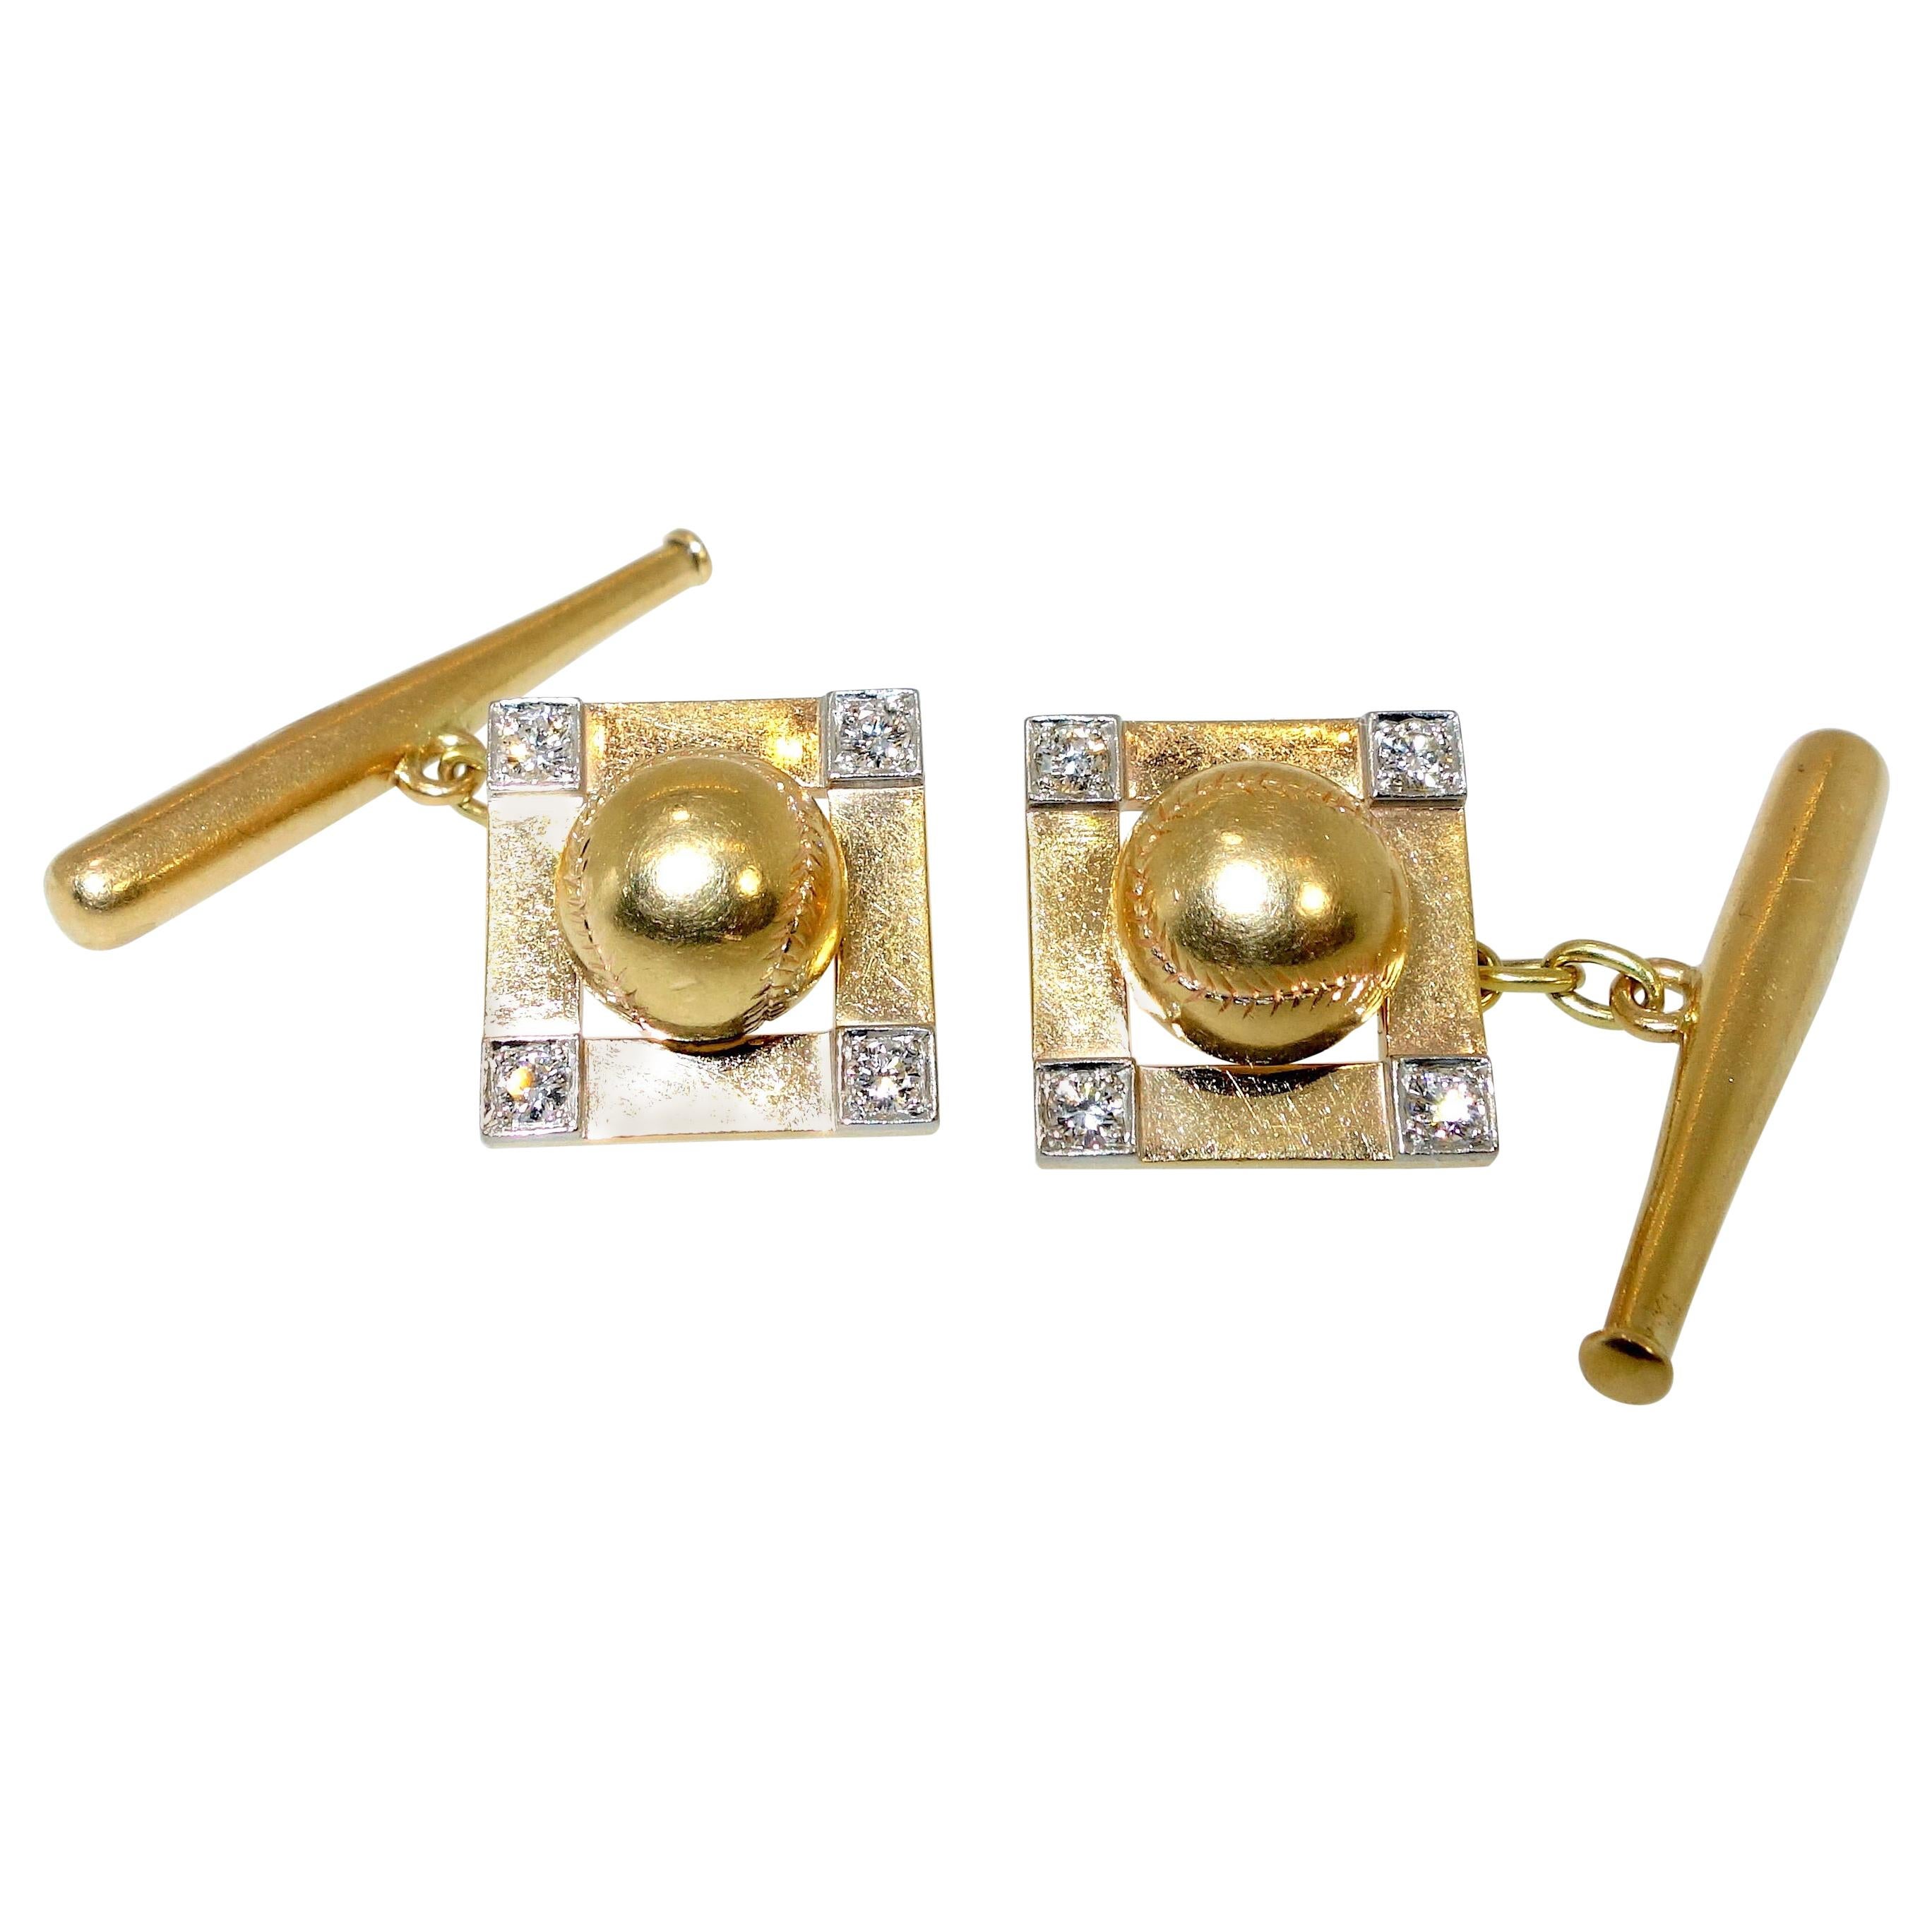  Gold cufflinks with a baseball motif, these cufflinks are quite unusual, they were made circa 1935.  The small diamonds are set in platinum.  Notice the detail on the baseball, the fine modeling of the gold bat, and the creative touch of the